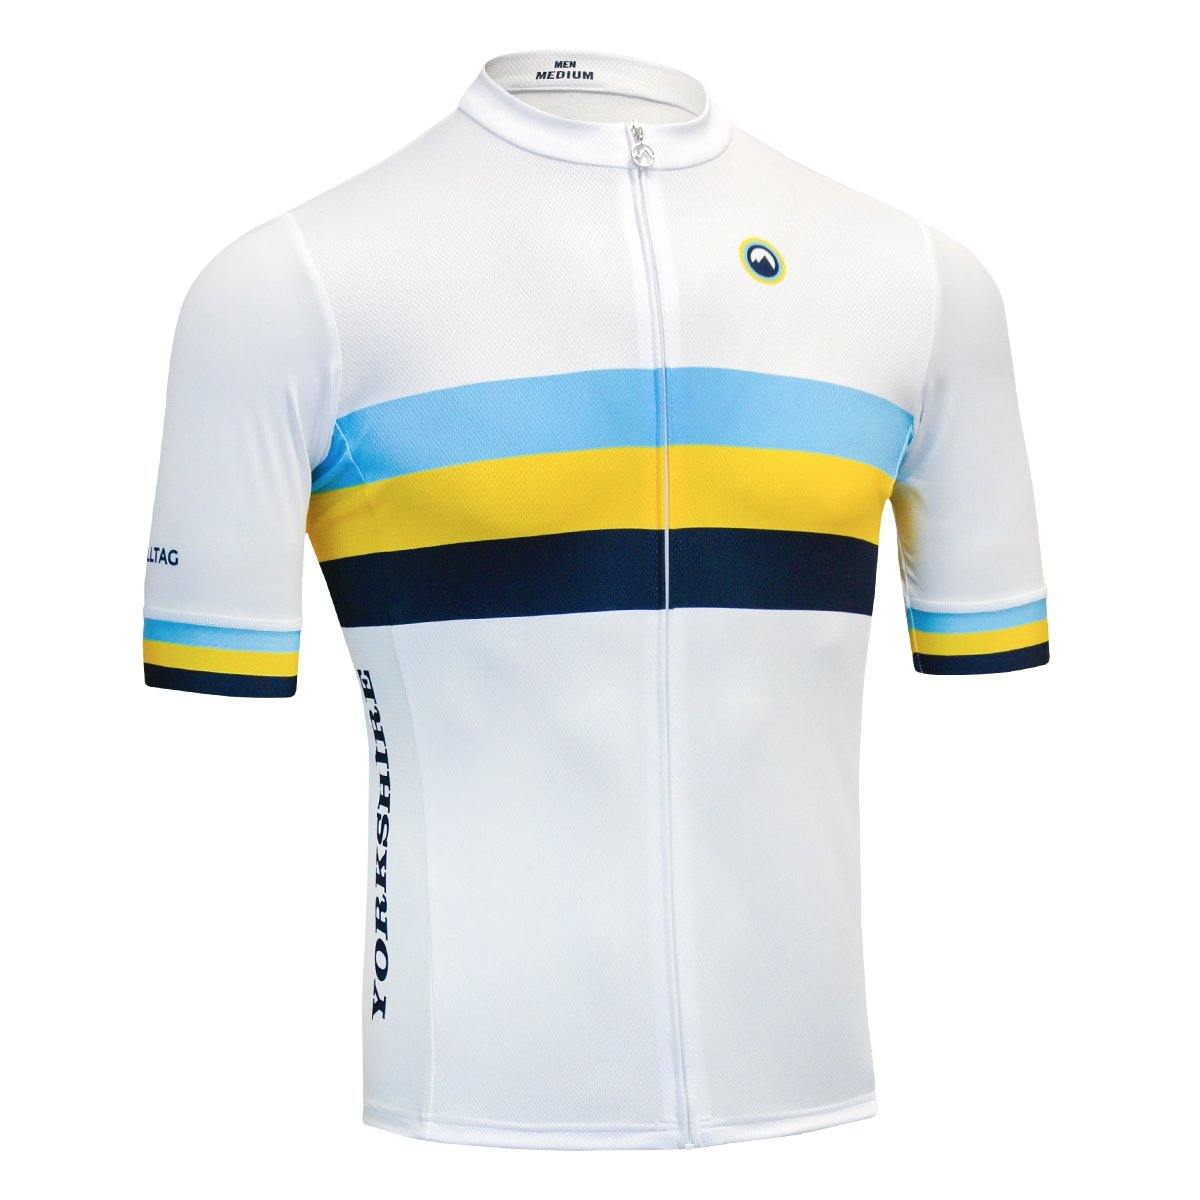 YORKSHIRE CLASSIC FLYWEIGHT JERSEY